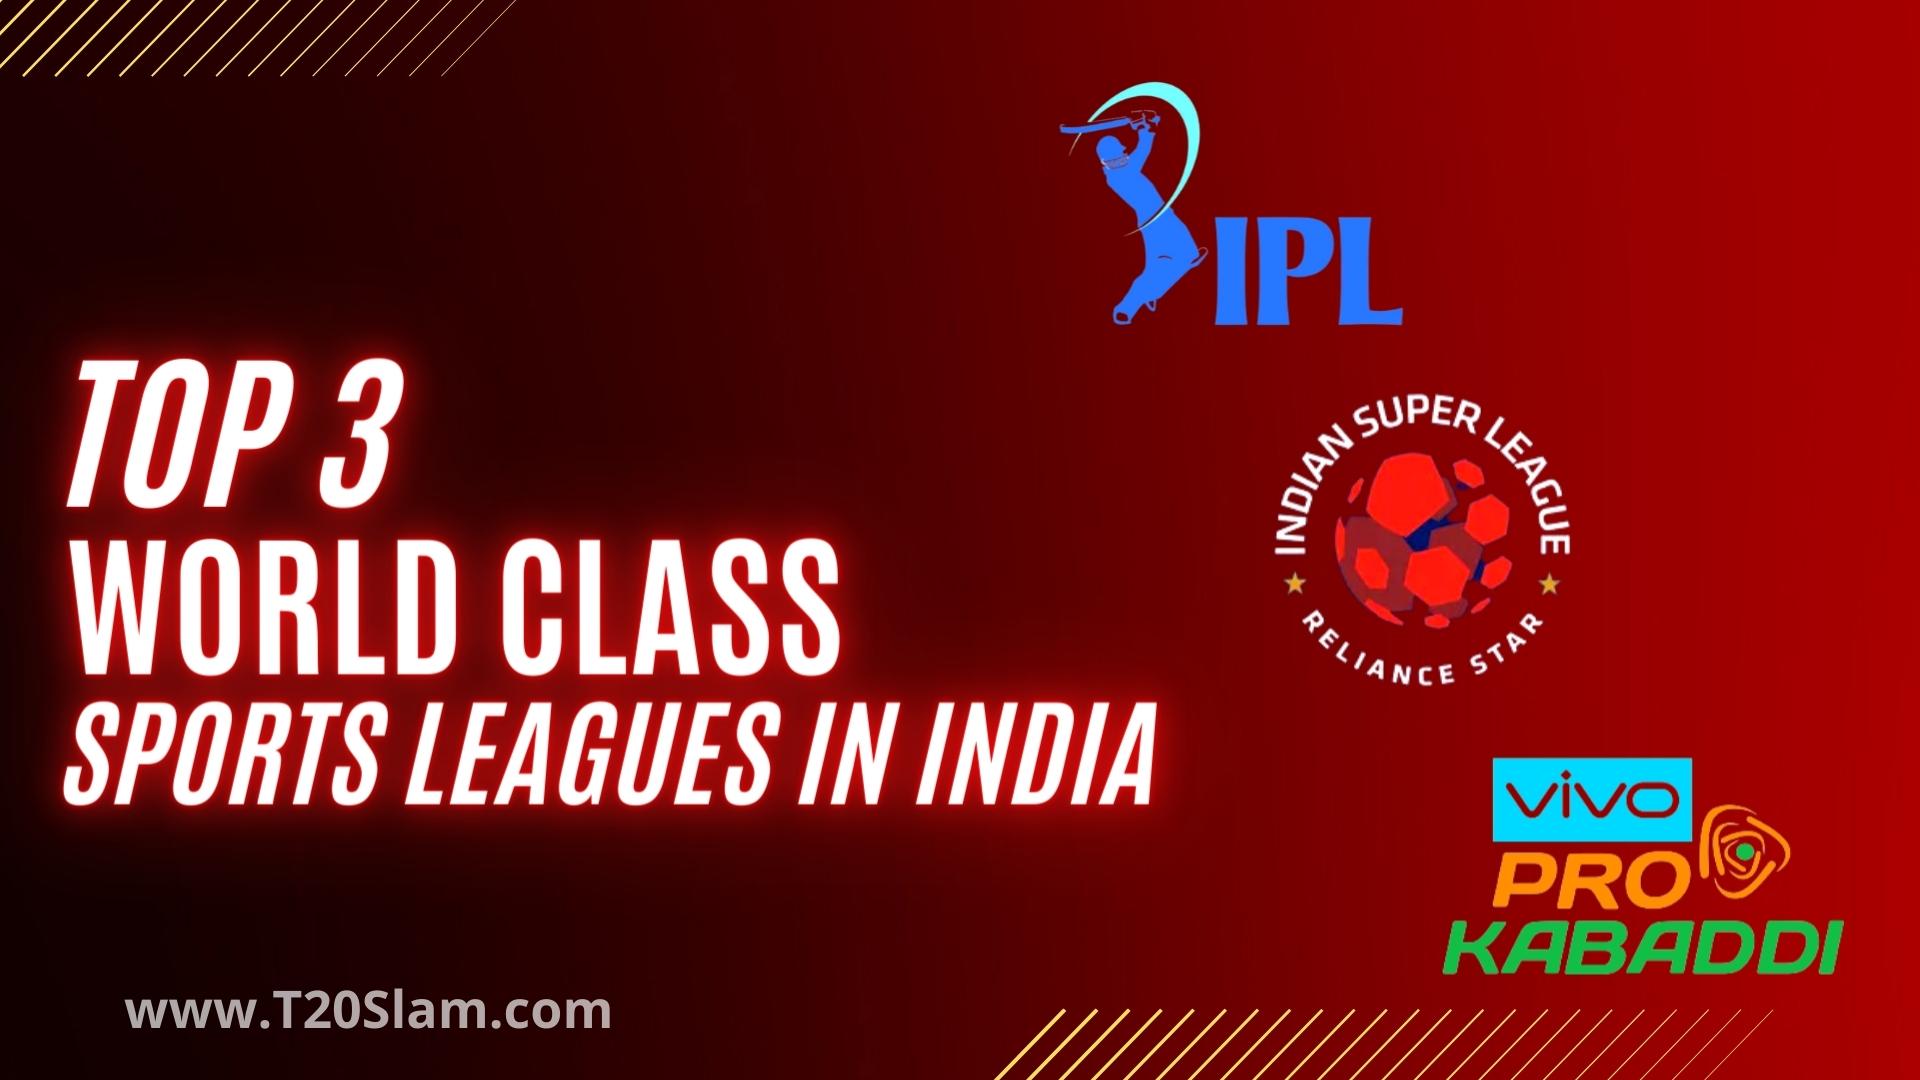 Top 3 Most Popular Cash-Rich and World-Class Sports Leagues in India